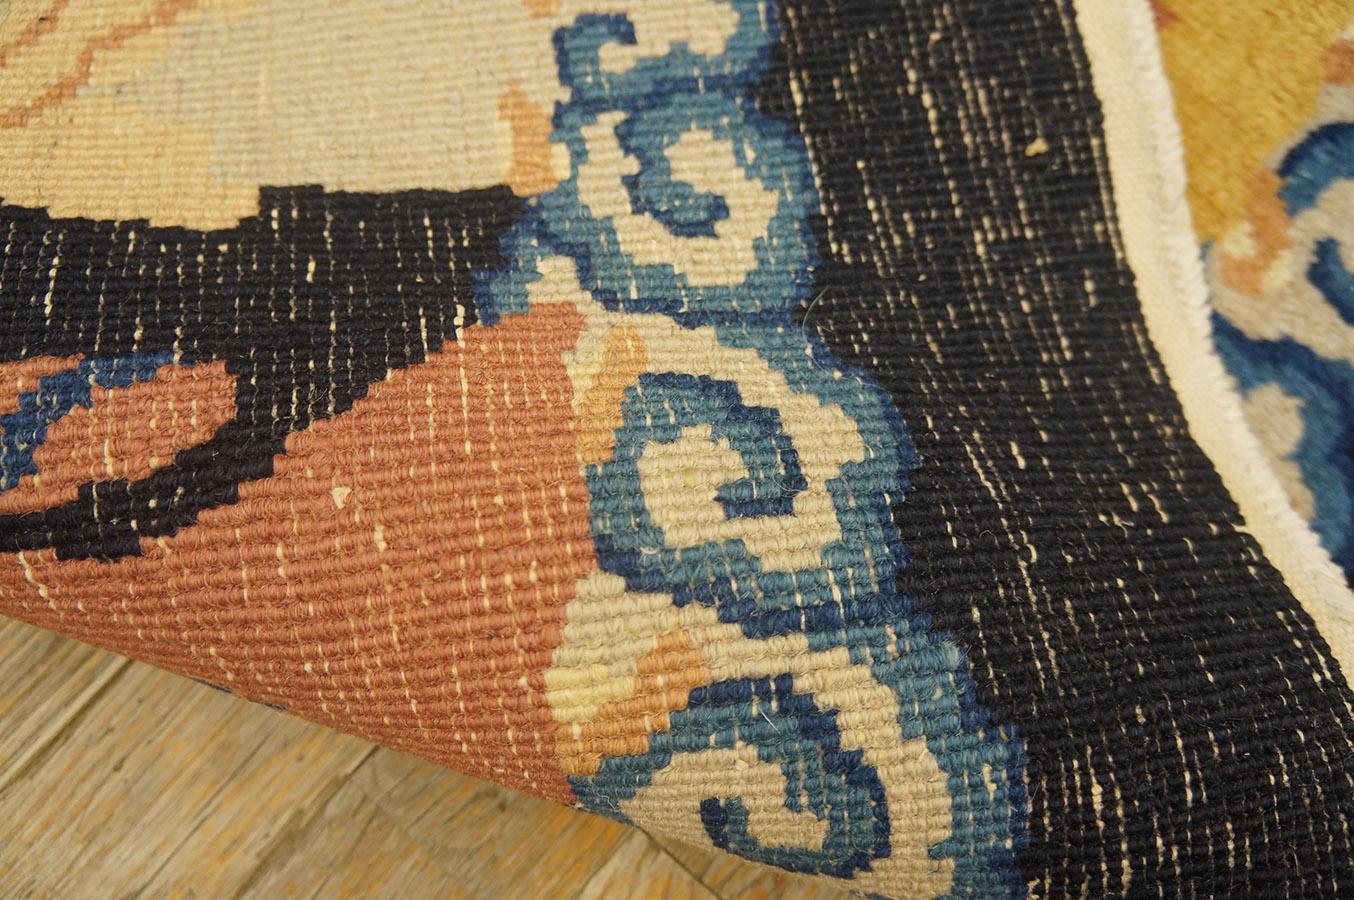 1920s Pictorial Chinese Art Deco Carpet ( 5'6